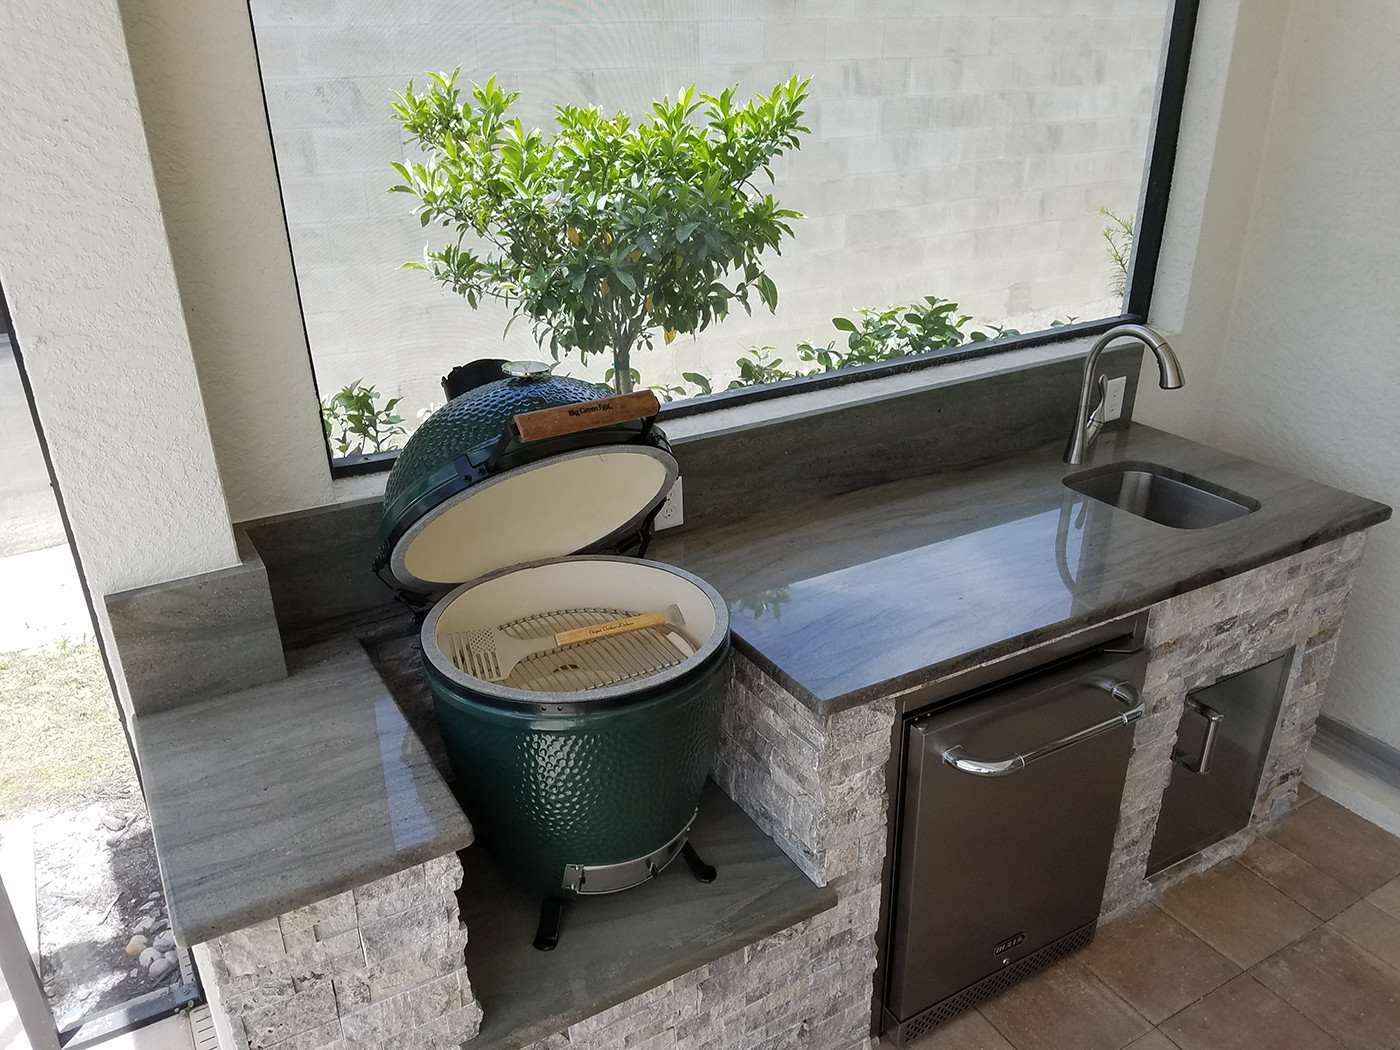 Outdoor Kitchen With Green Egg
 The Big Green Egg Outdoor Kitchen Elegant Outdoor Kitchens